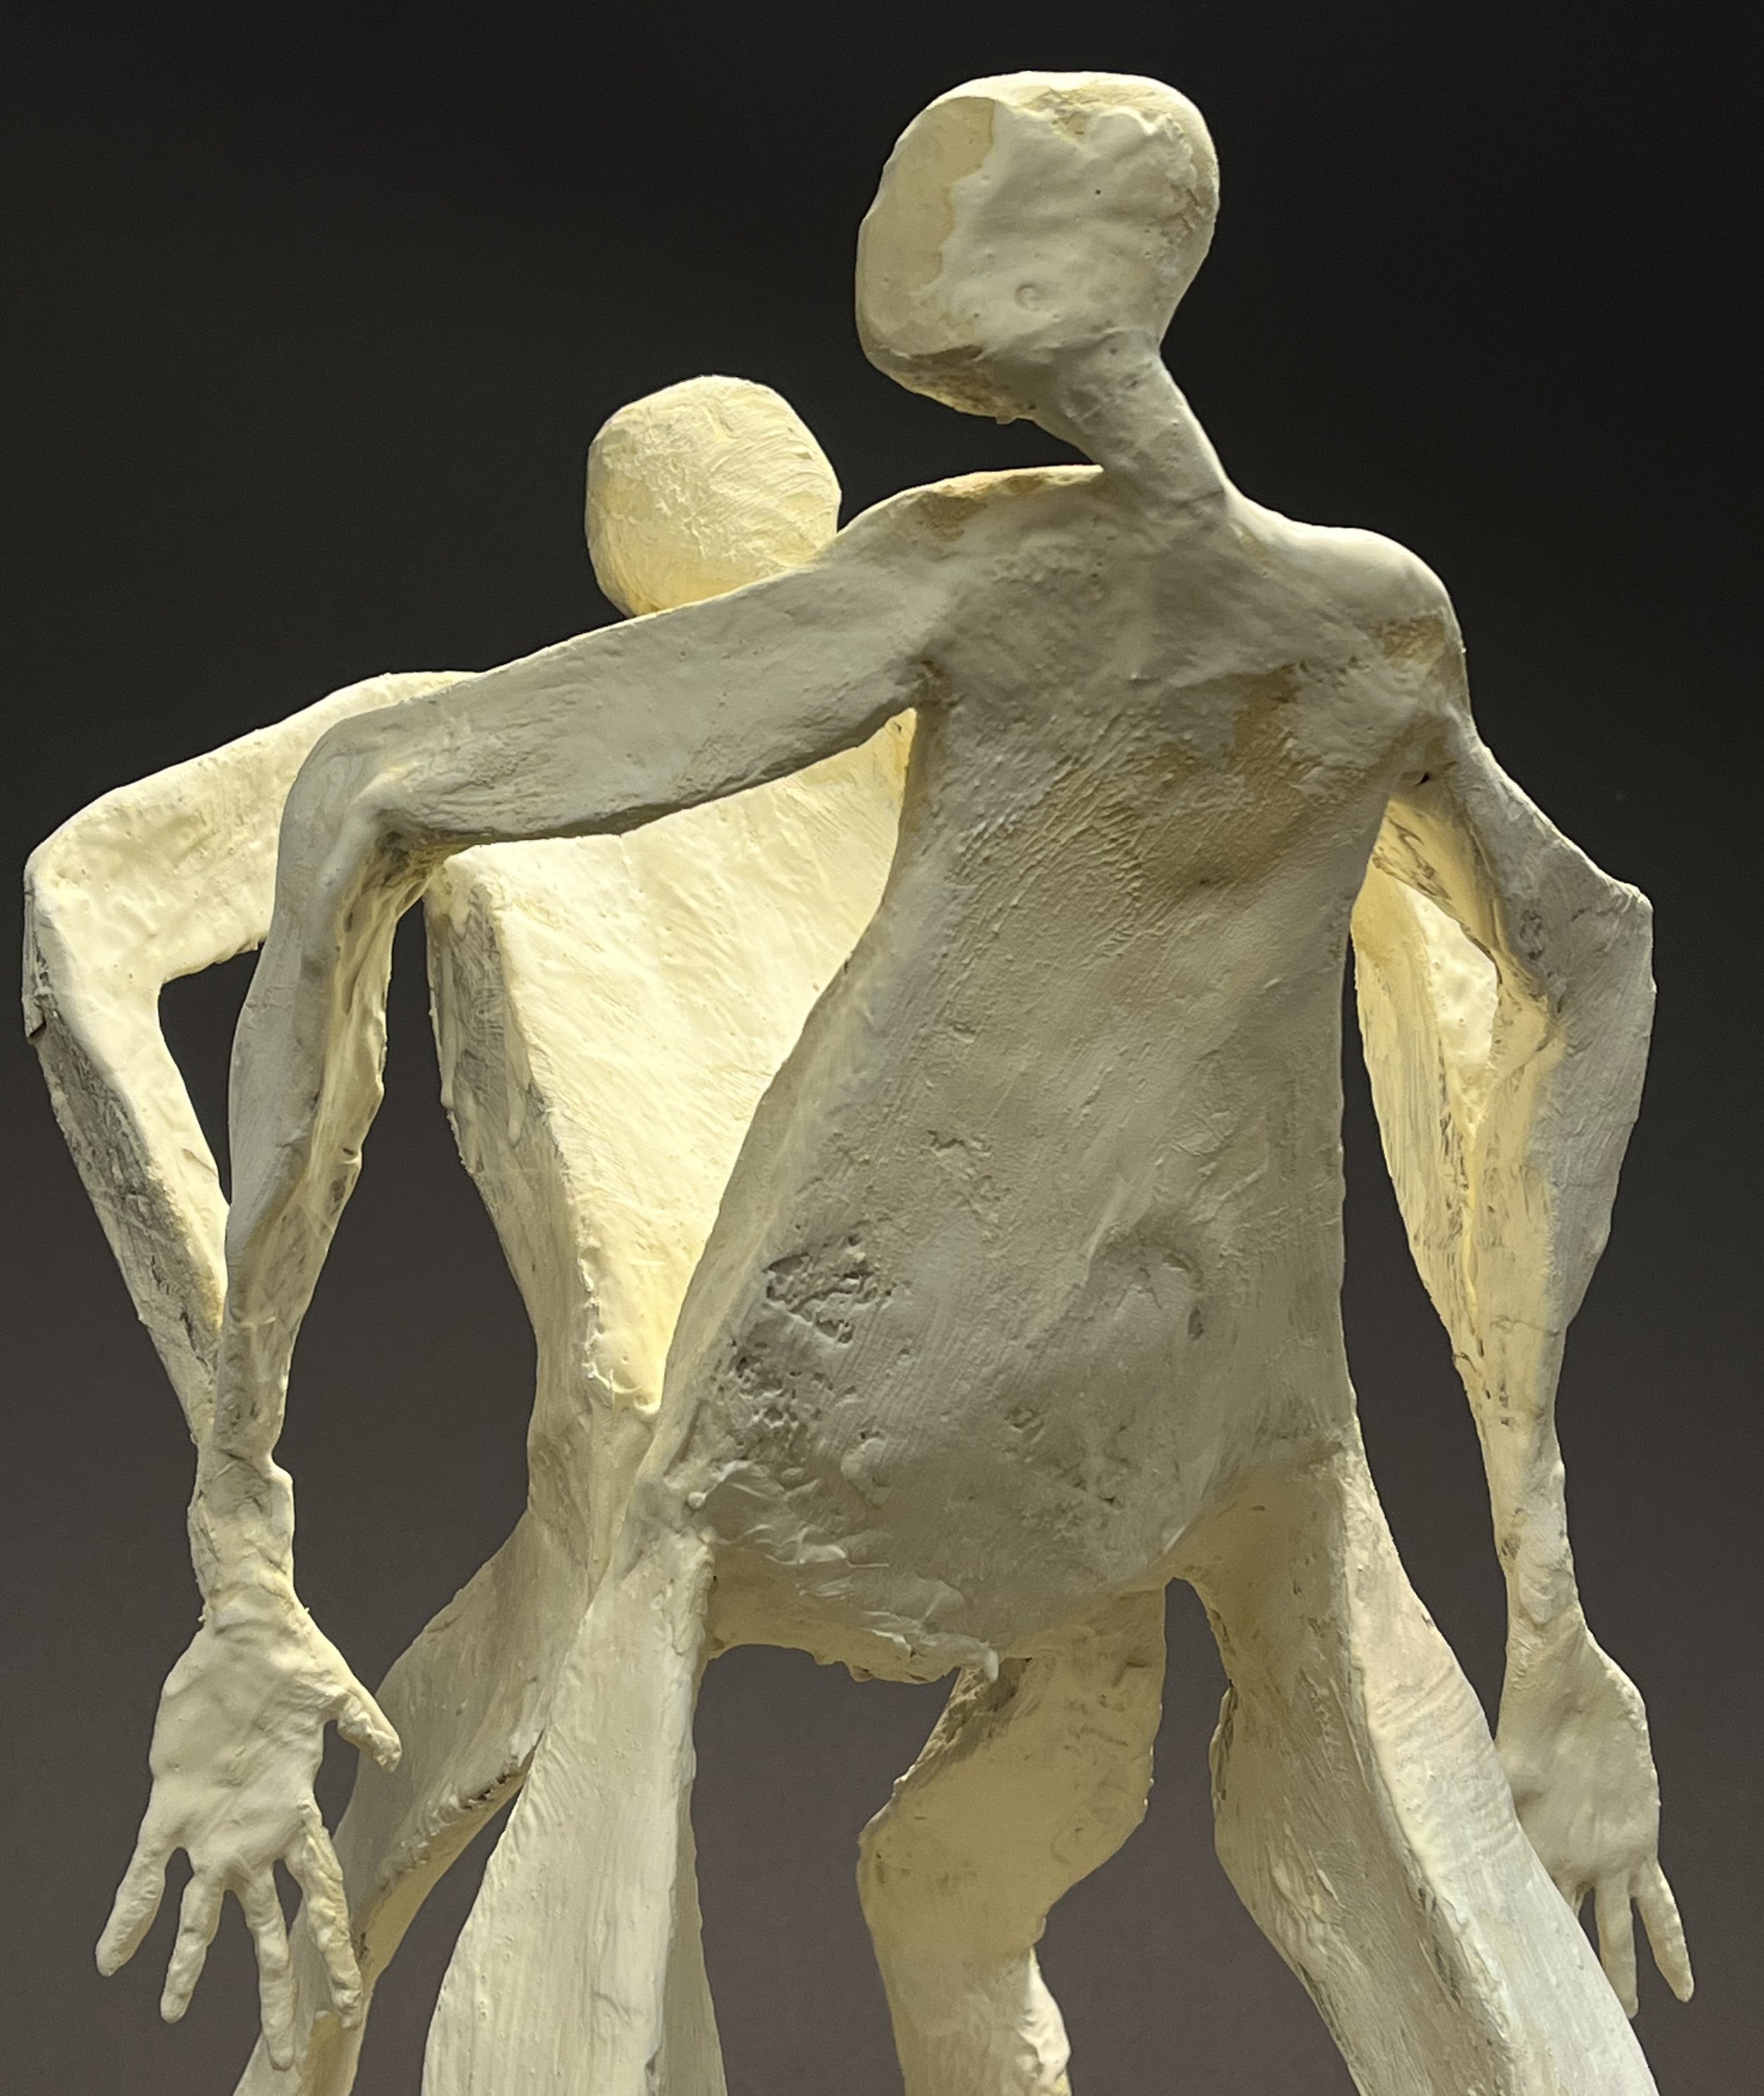 Sculptor's Process - How to create dynamic sculptures Chas Martin